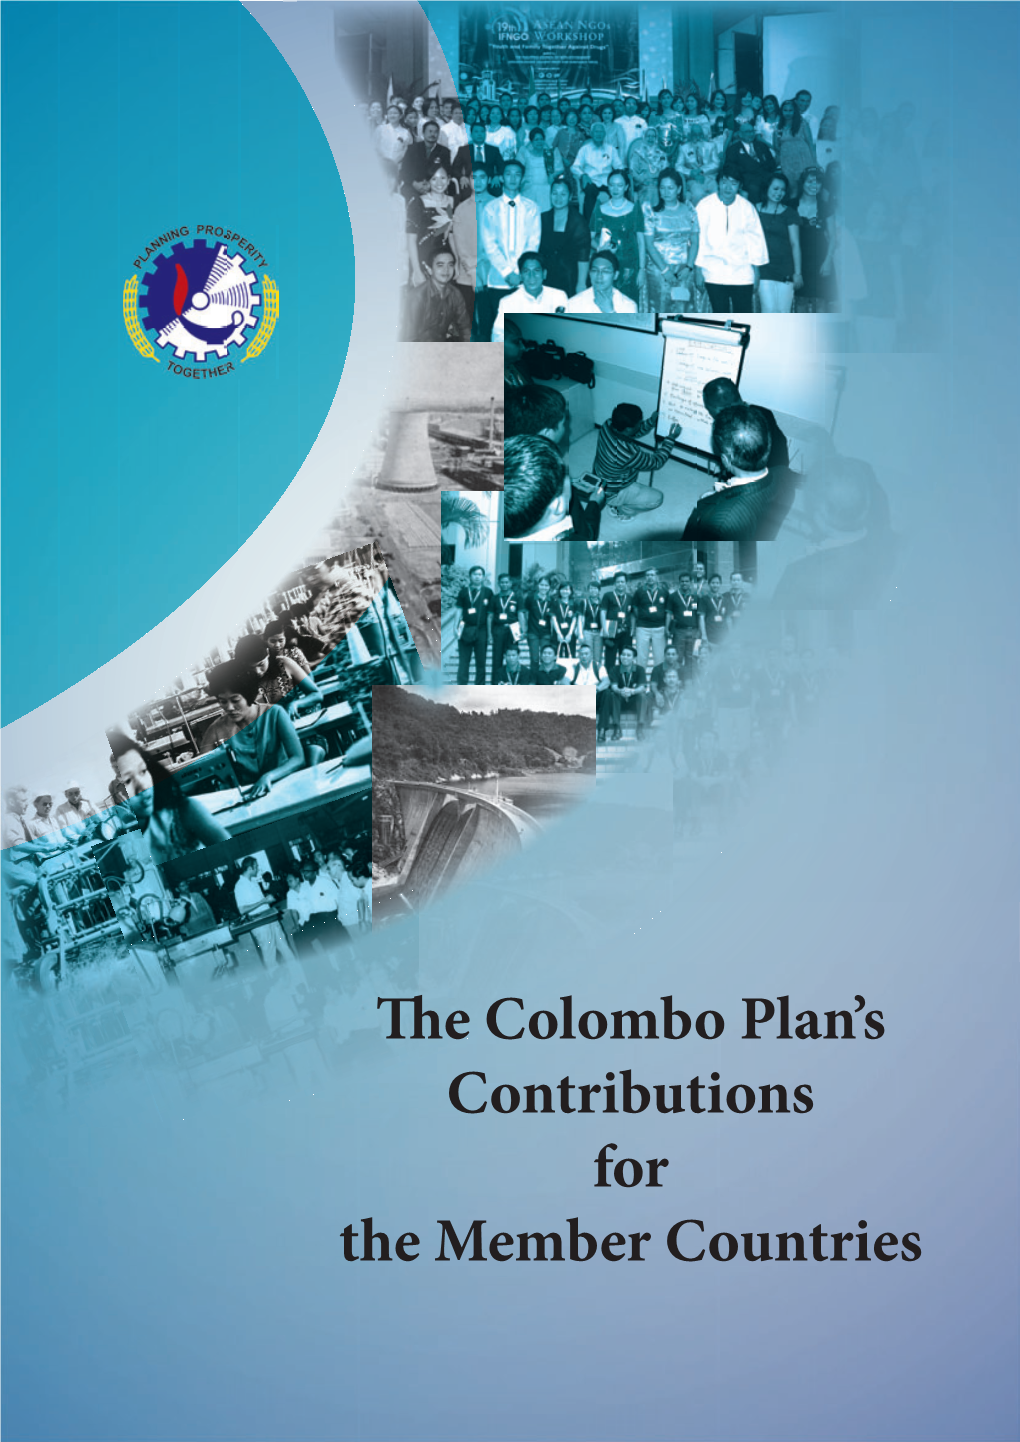 The Colombo Plan's Contributions of the Member Countries